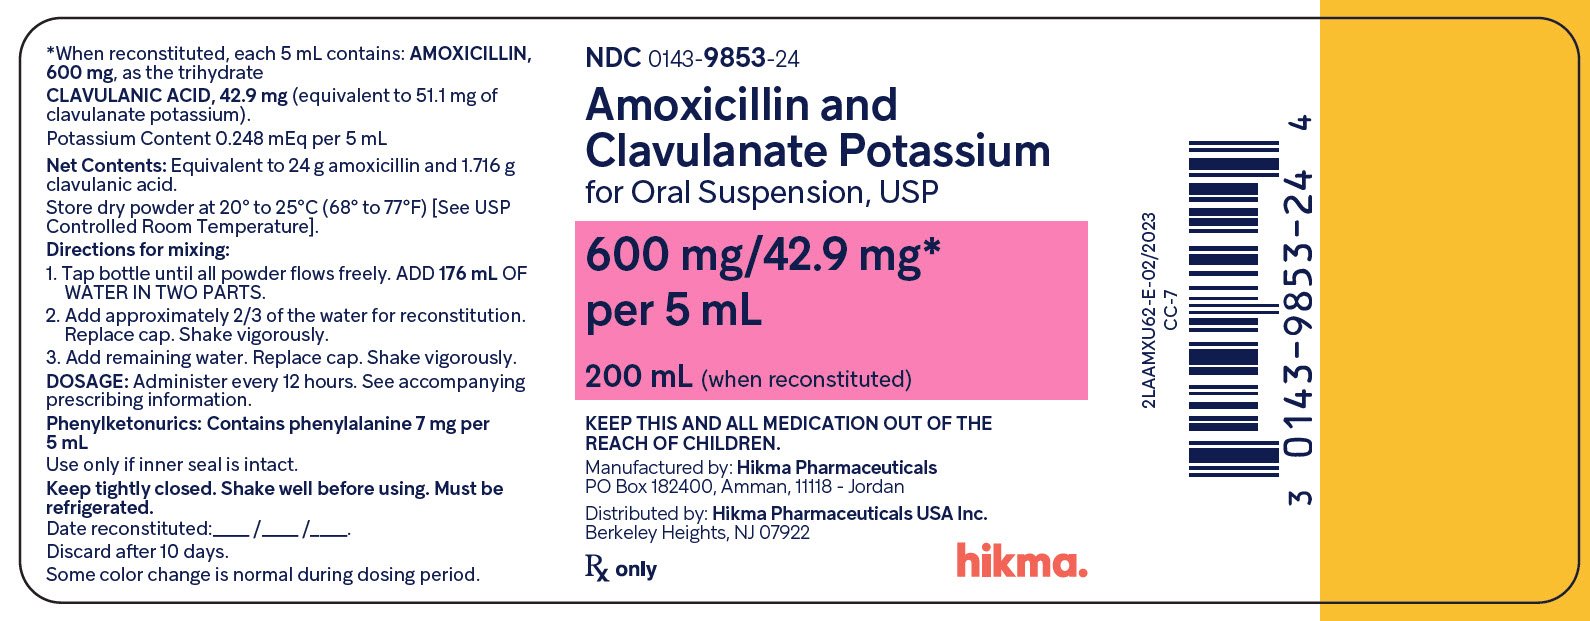 Amoxicillin and Clavulanate Potassium for Oral Suspension USP, 600 mg/42.9 mg per 5 mL (200 mL) bottle label image